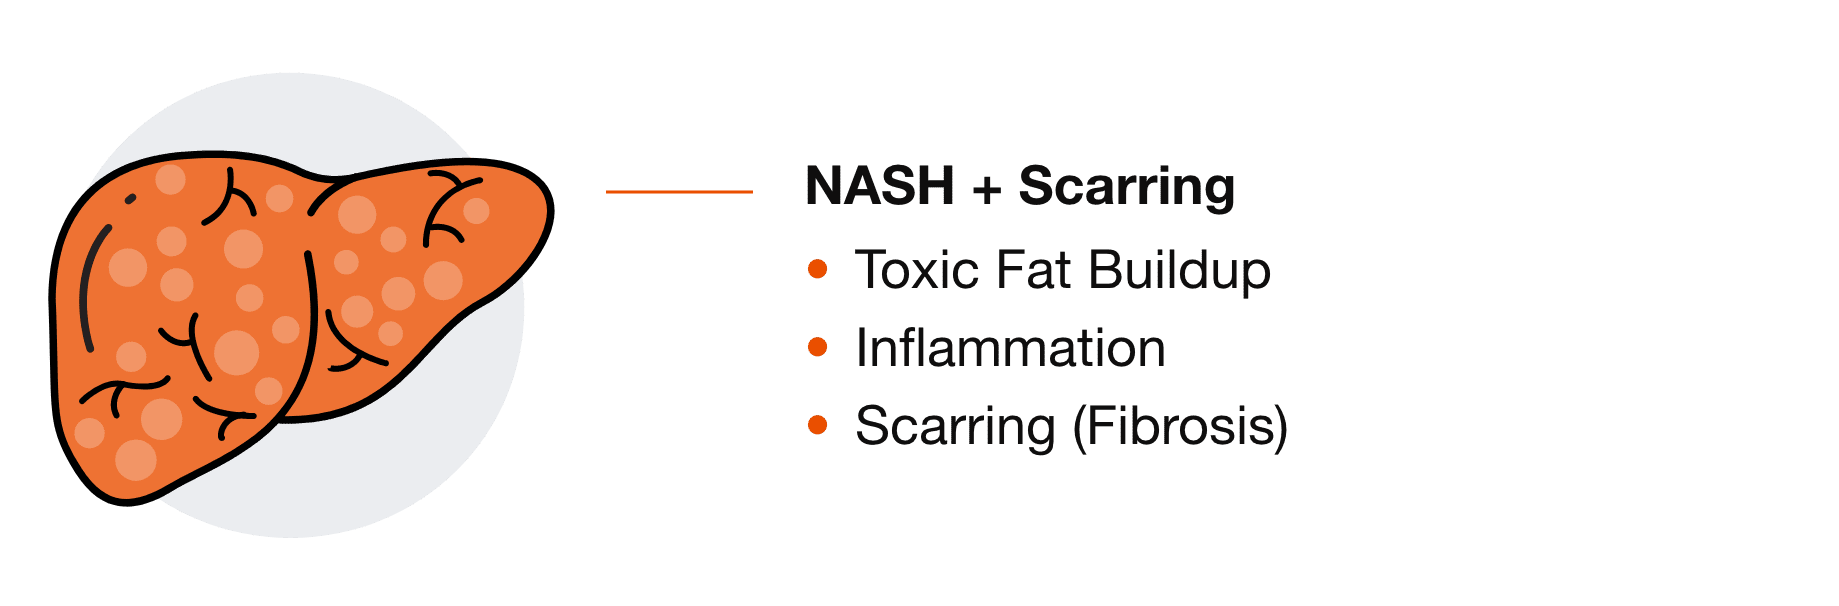 NASH and Scarring: Toxic Fat Buildup, Inflammation, and Scarring (Fibrosis)